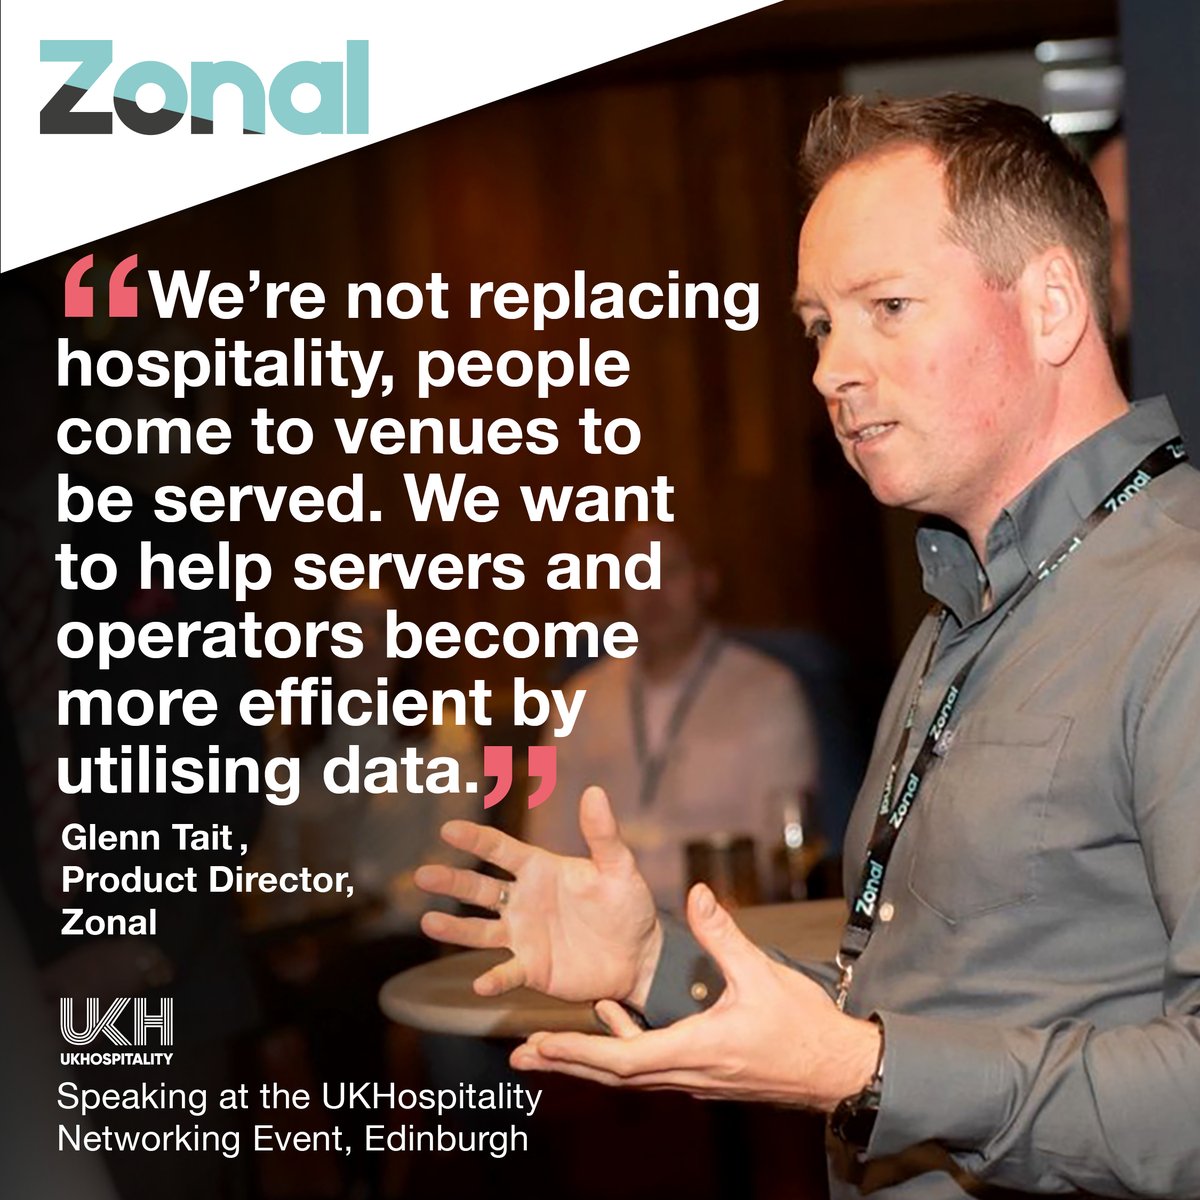 🏴󠁧󠁢󠁳󠁣󠁴󠁿 What an incredibly insightful evening at @UKHofficial's Scottish networking event. “We’re not replacing hospitality, people come to venues to be served. We want to help servers and operators become more efficient by utilising data.” Glenn Tait, Product Director #ZonalUK #UKH